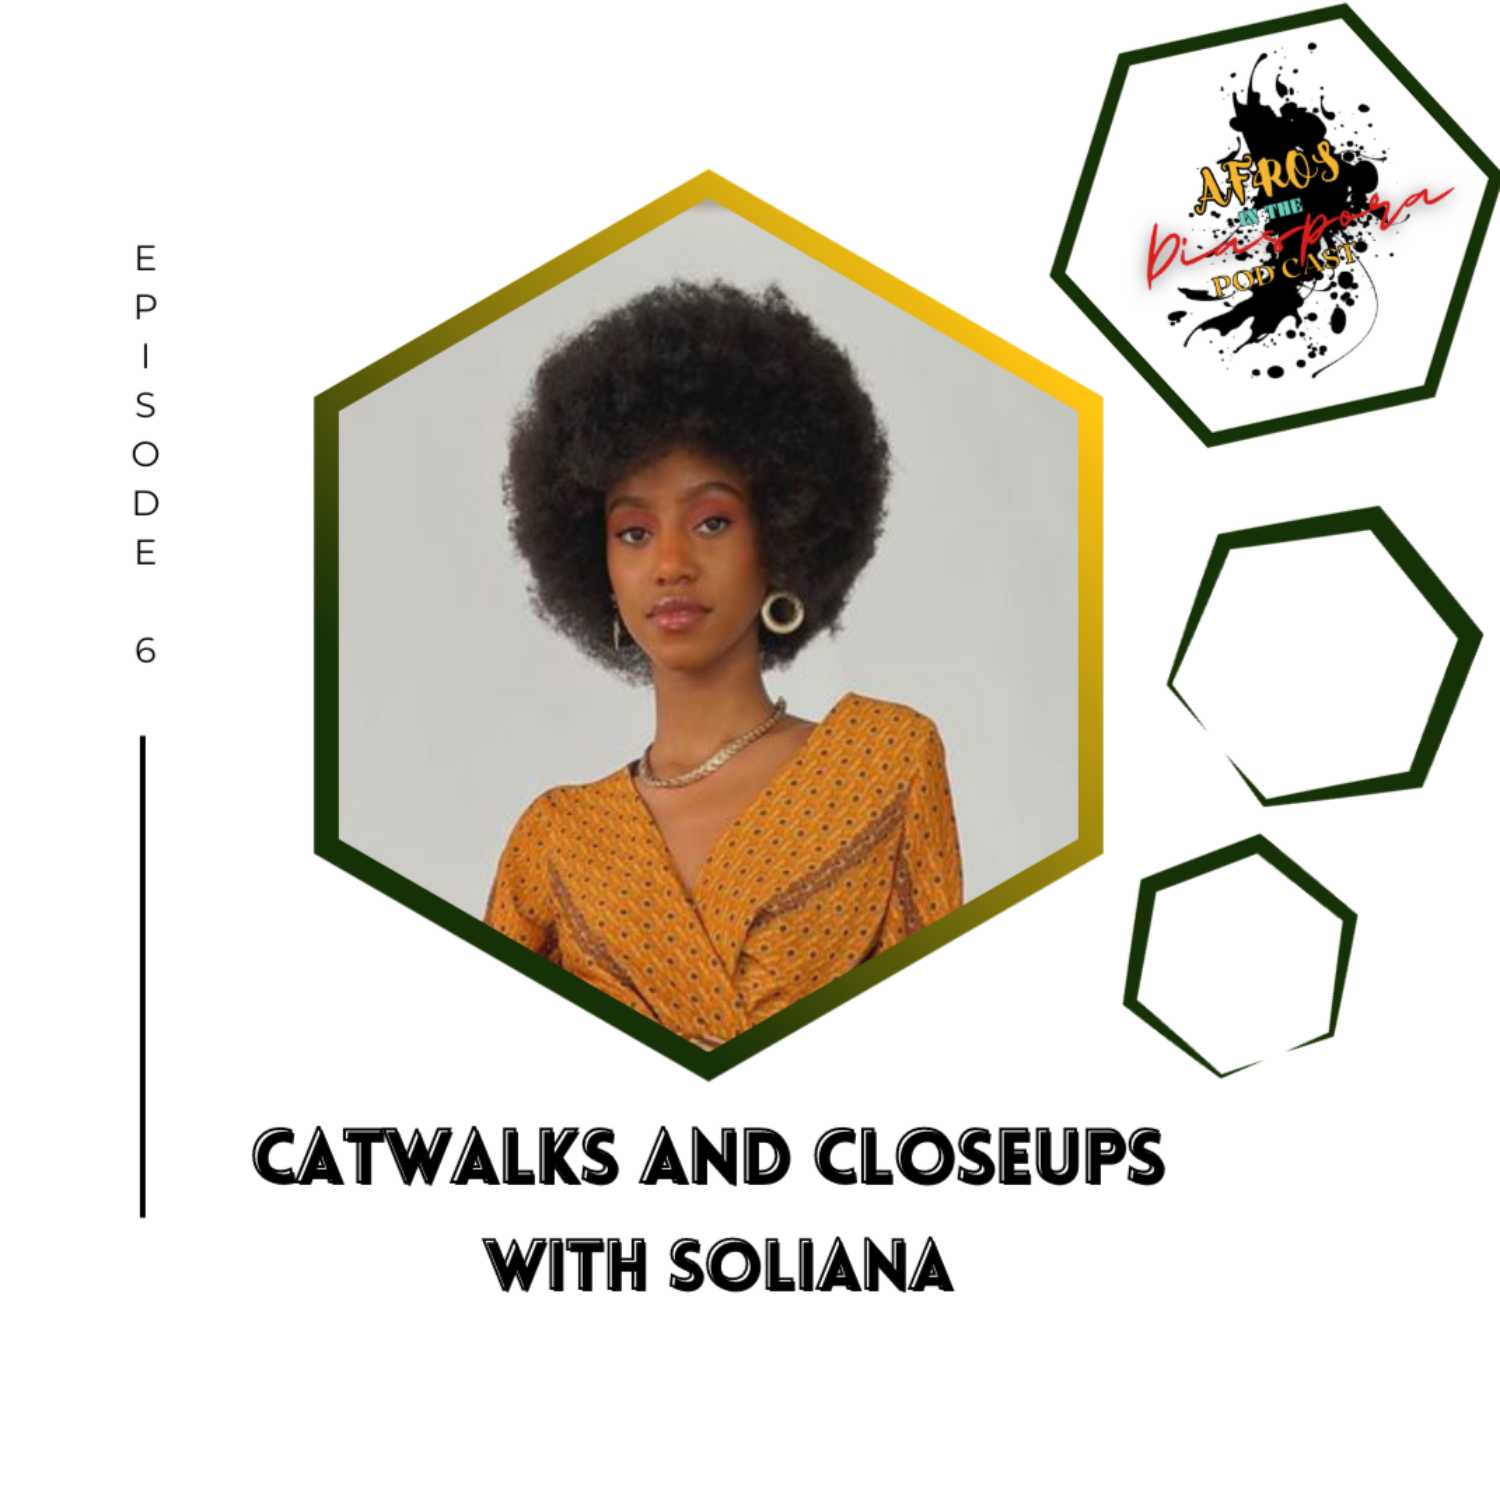 Catwalks and Close-ups with Soliana